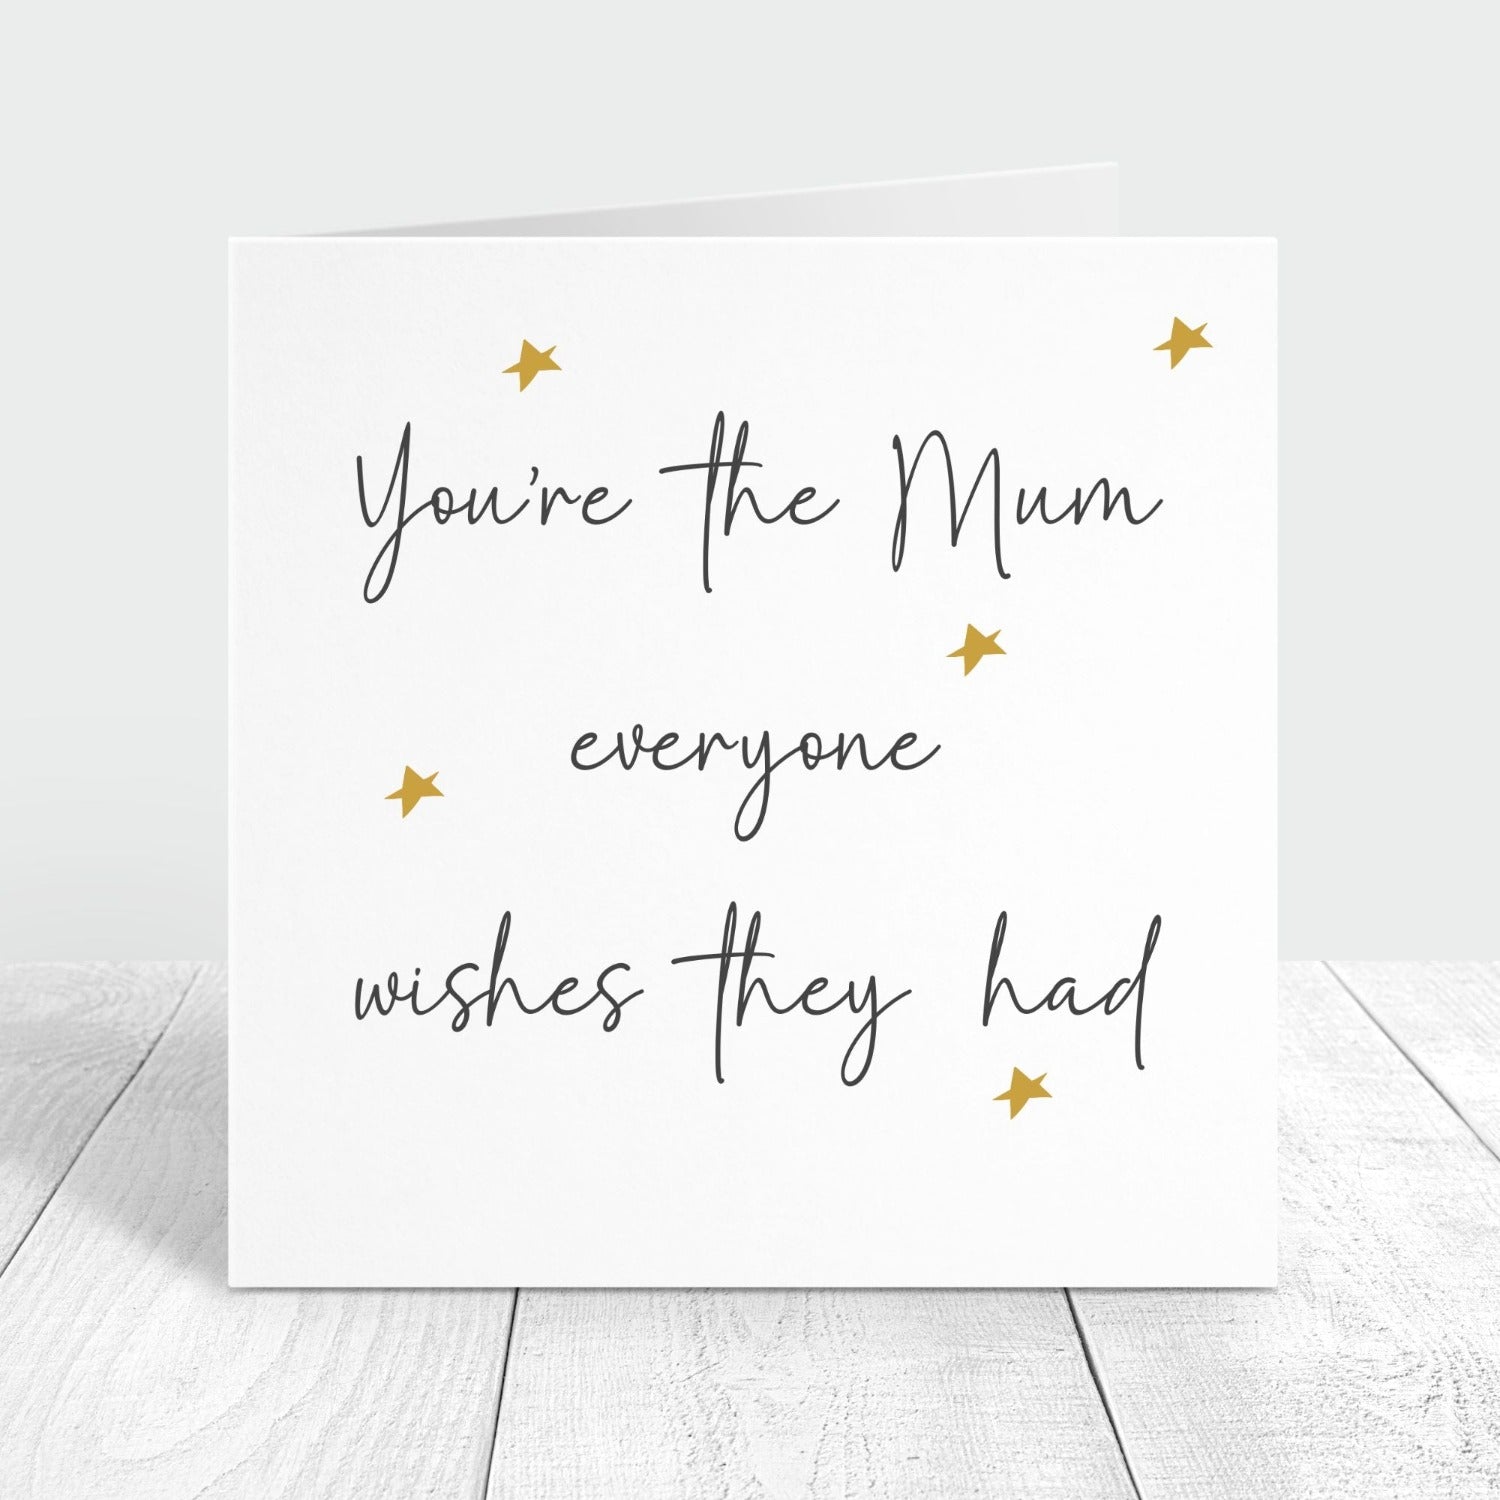 You're the mum everyone wishes they had card